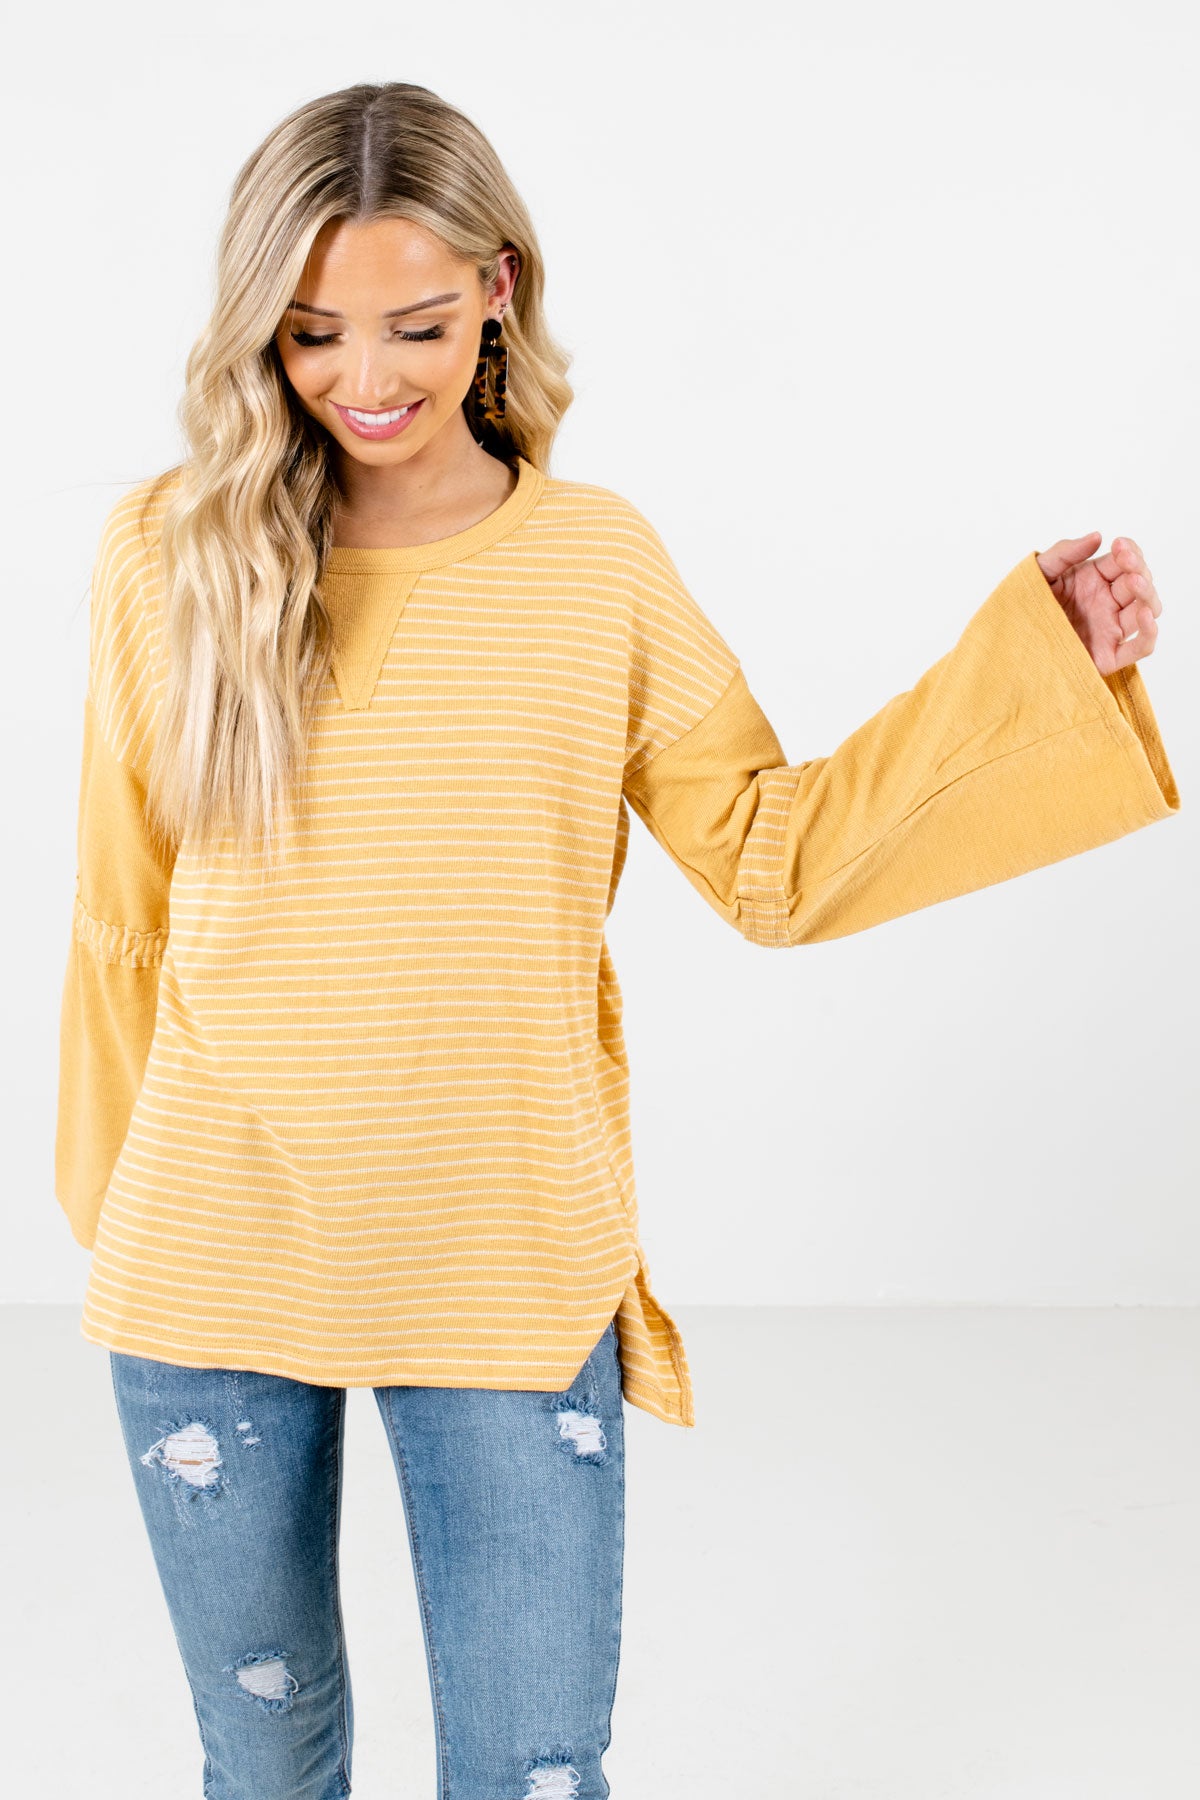 Yellow Cute and Comfortable Boutique Tops for Women